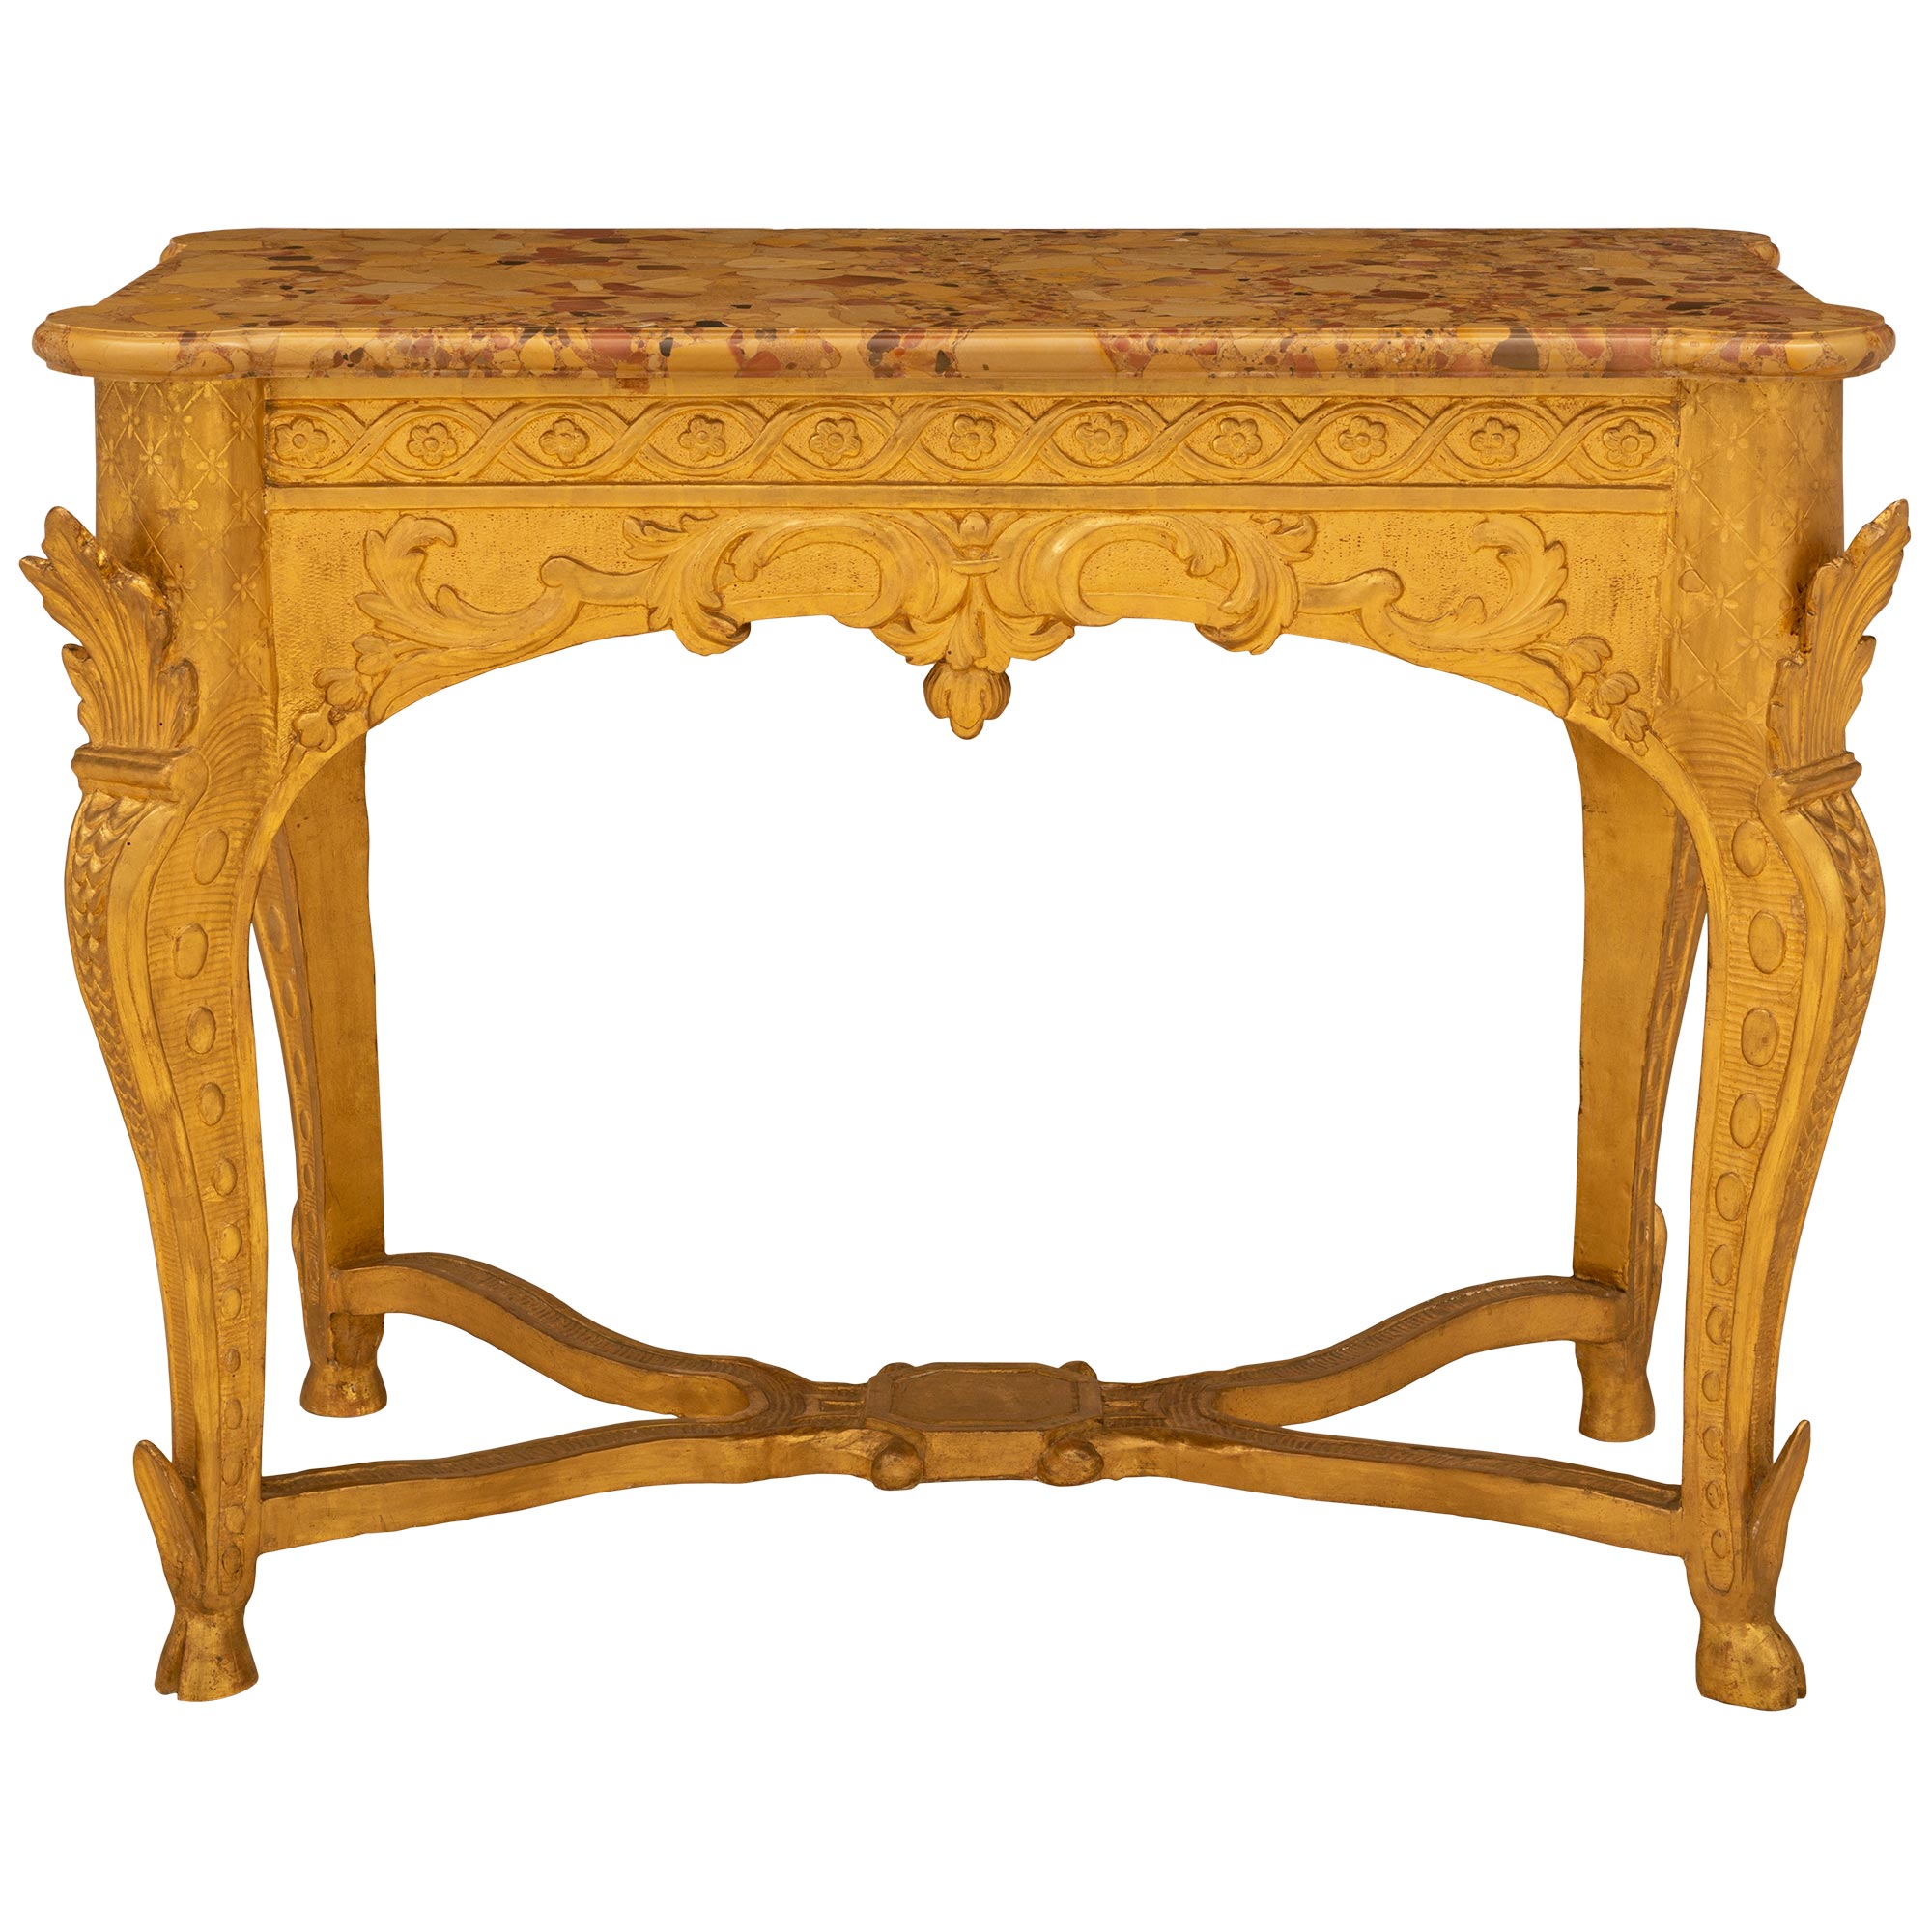 French 18th Century Regence Period Giltwood Console For Sale